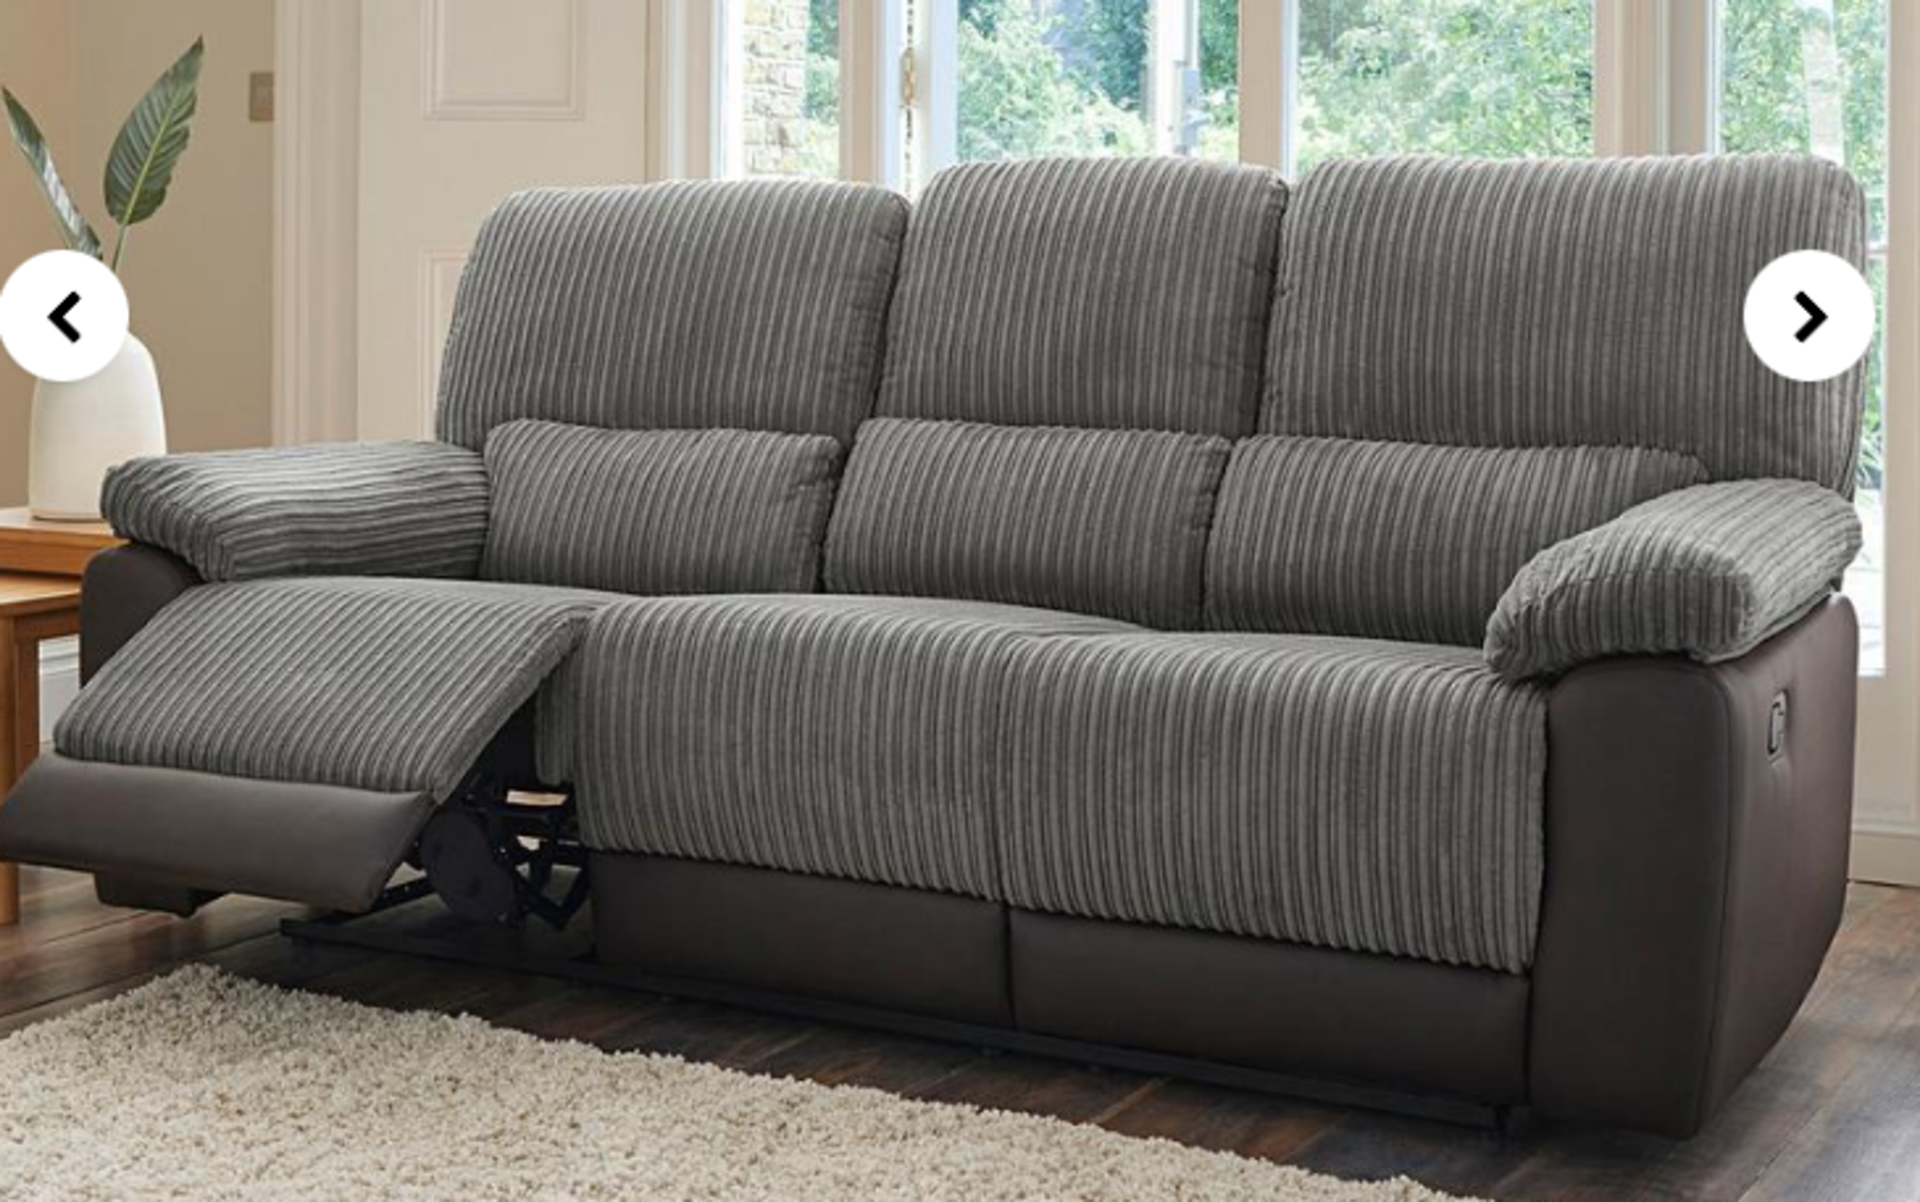 Harlow Fabric/Faux Leather Recliner 3 Seater Sofa. - ER23. RRP £1,119.00. The Harlow Three Seater - Bild 2 aus 2